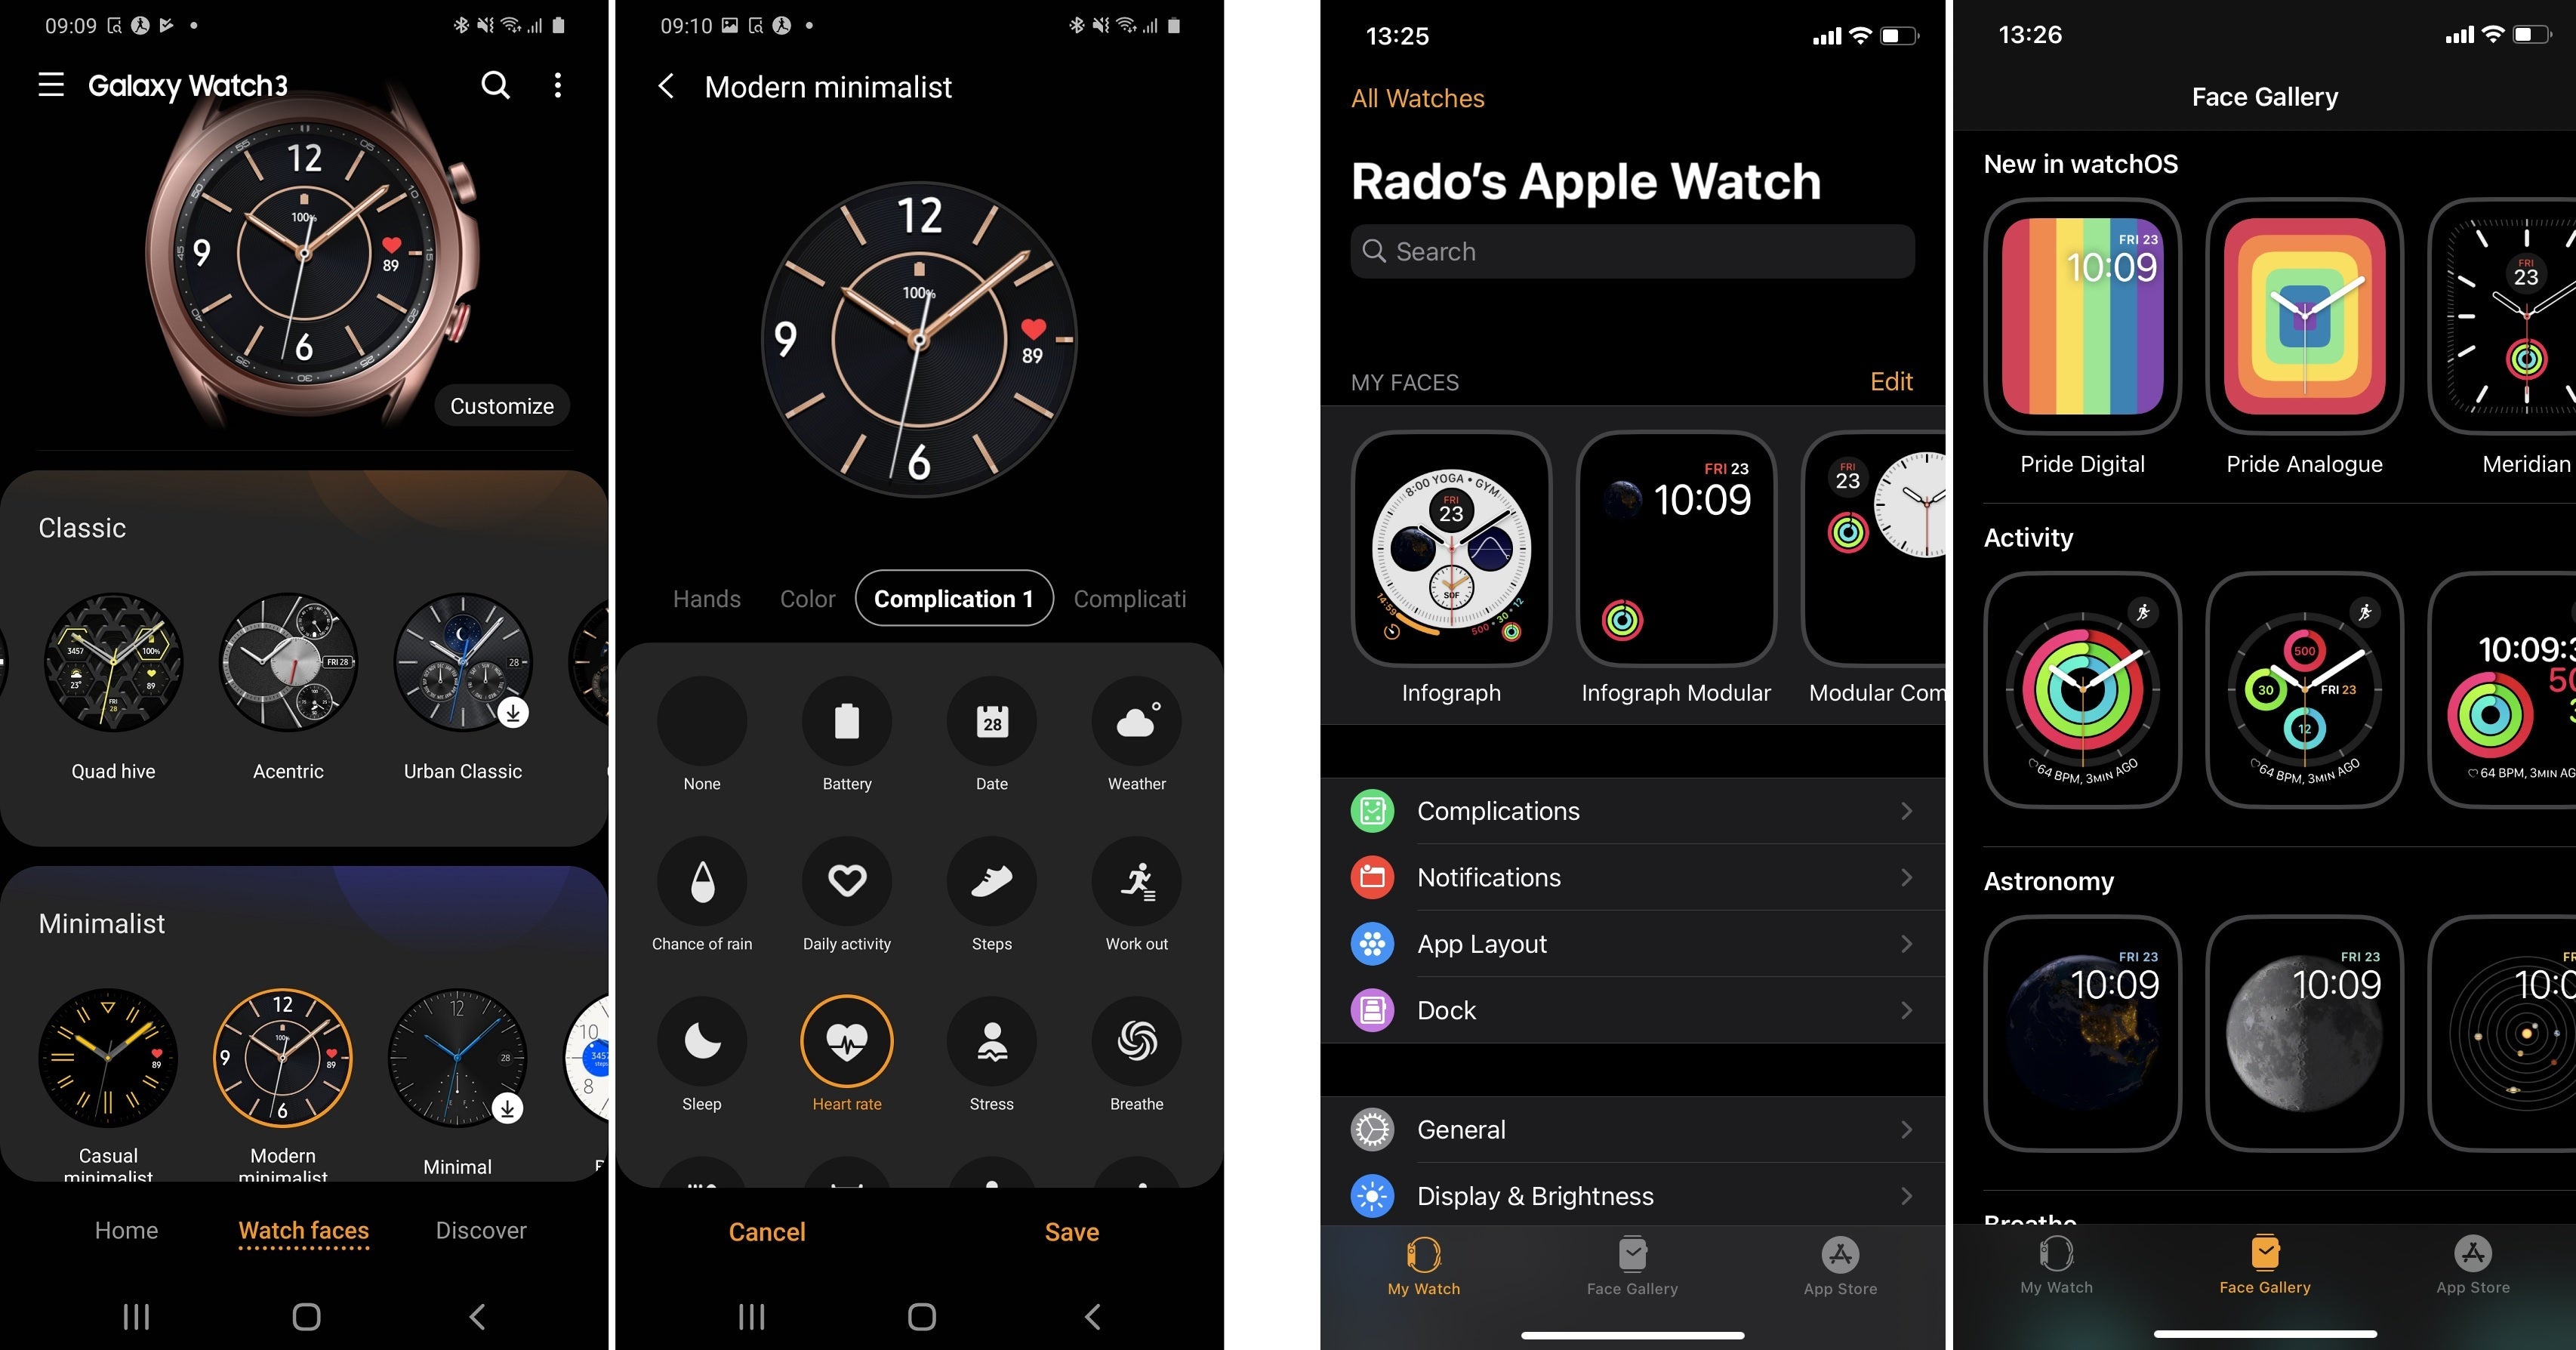 On the left we have two screenshots from the Galaxy Watch 3's smartphone companion app, while the two on the right are from the Apple Watch iPhone app - Apple Watch Series 5 vs Samsung Galaxy Watch 3